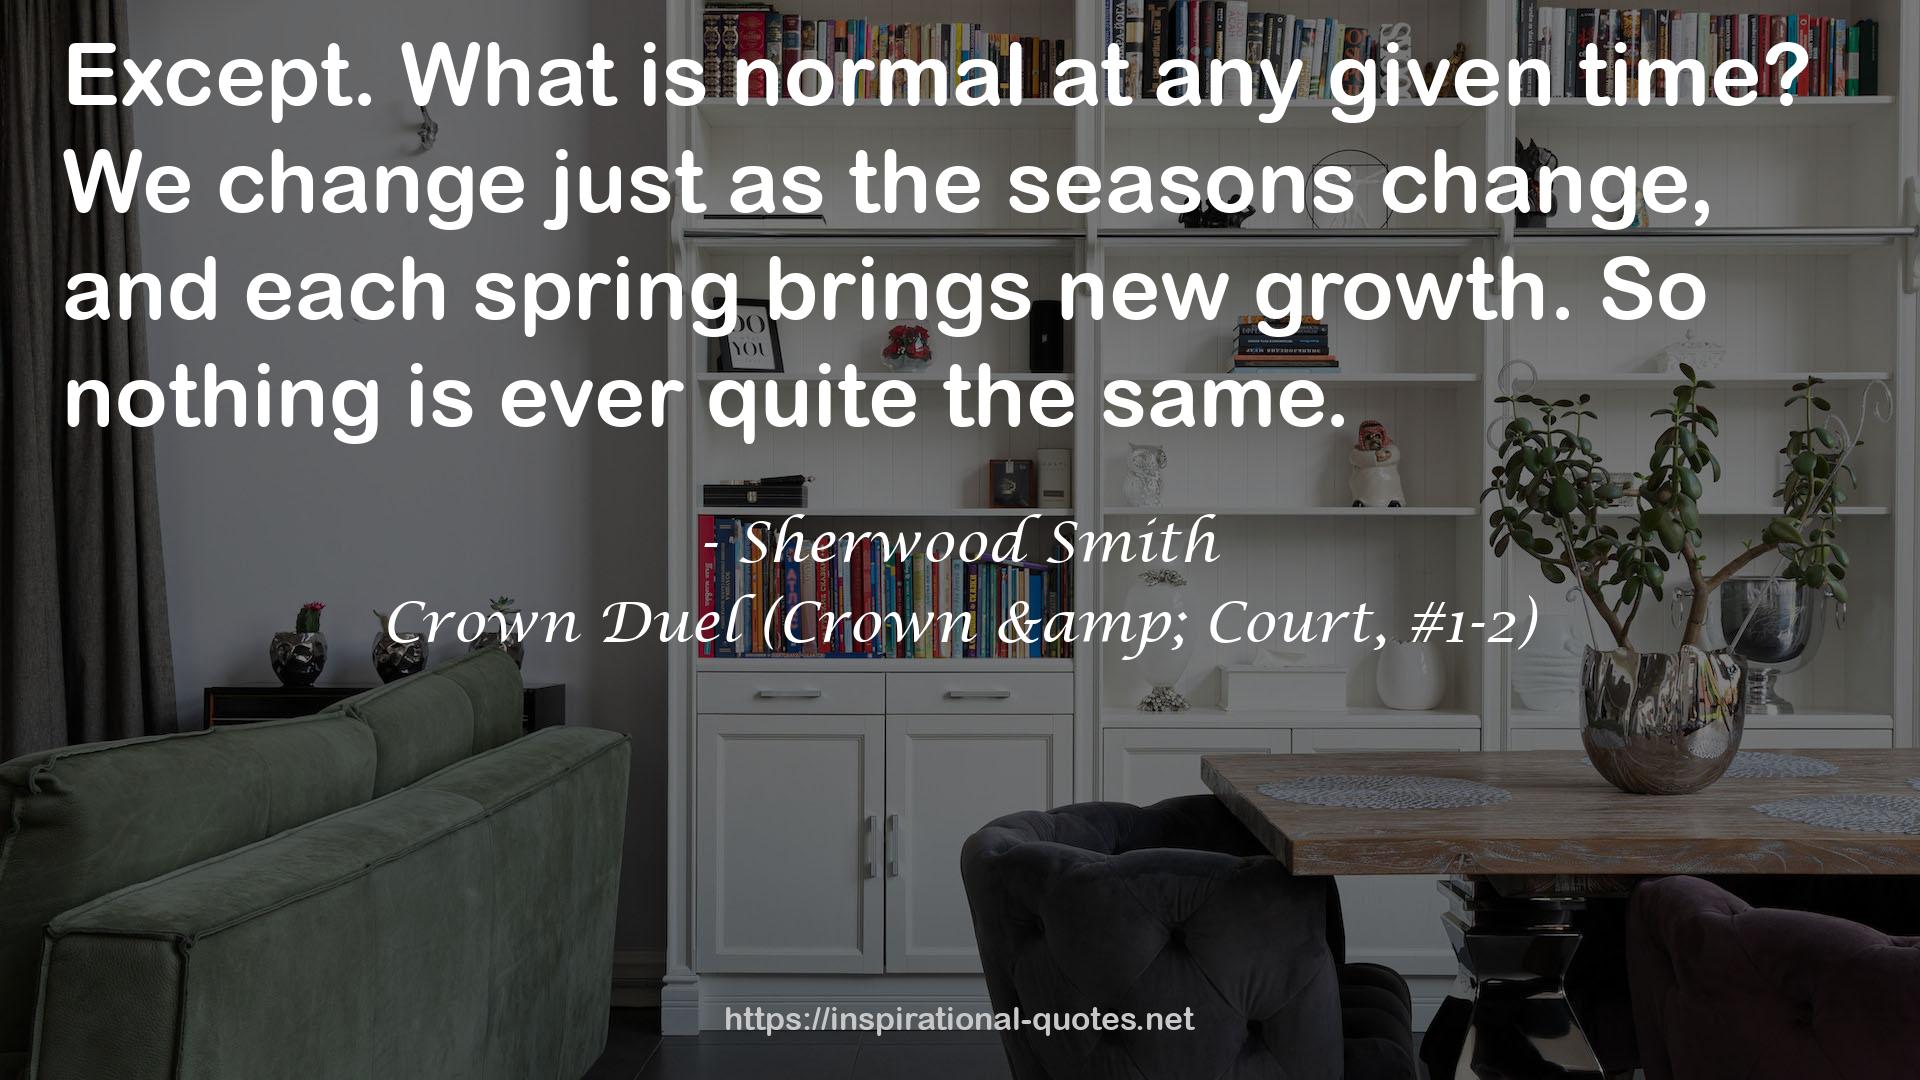 Crown Duel (Crown & Court, #1-2) QUOTES